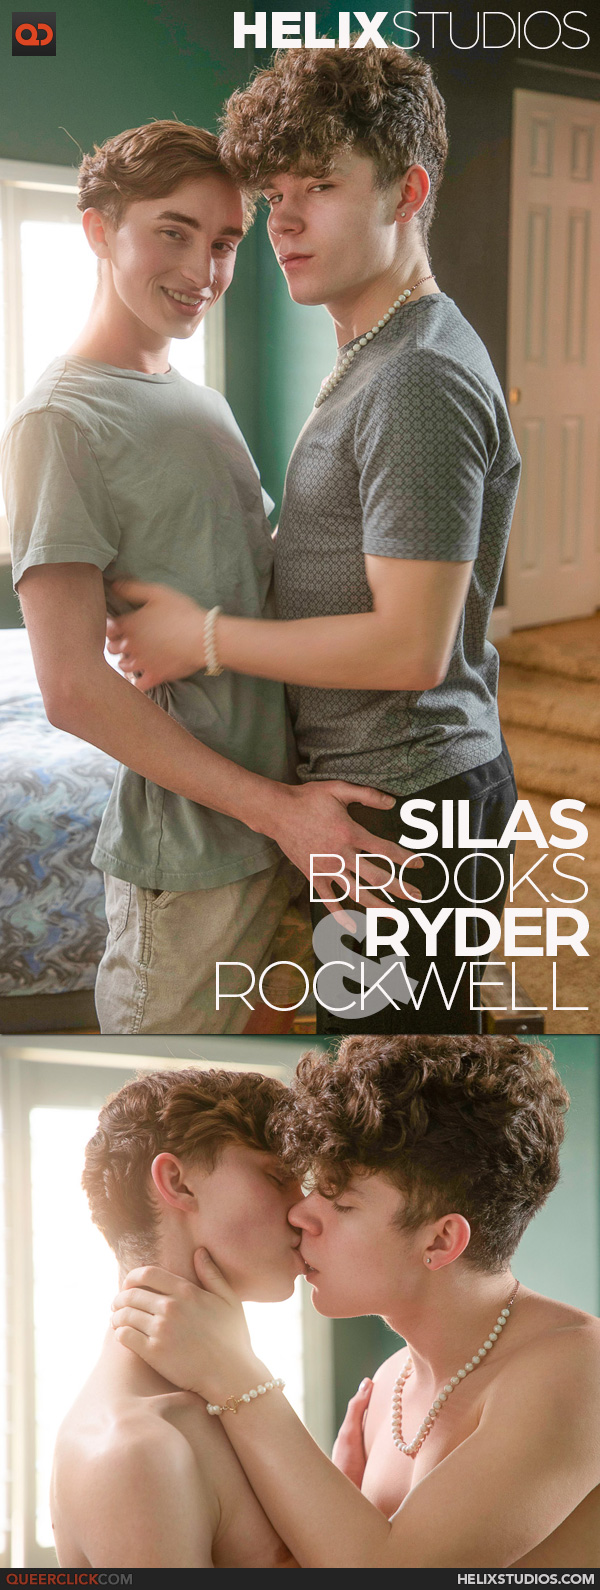 Helix Studios: Silas Brooks and Ryder Rockwell